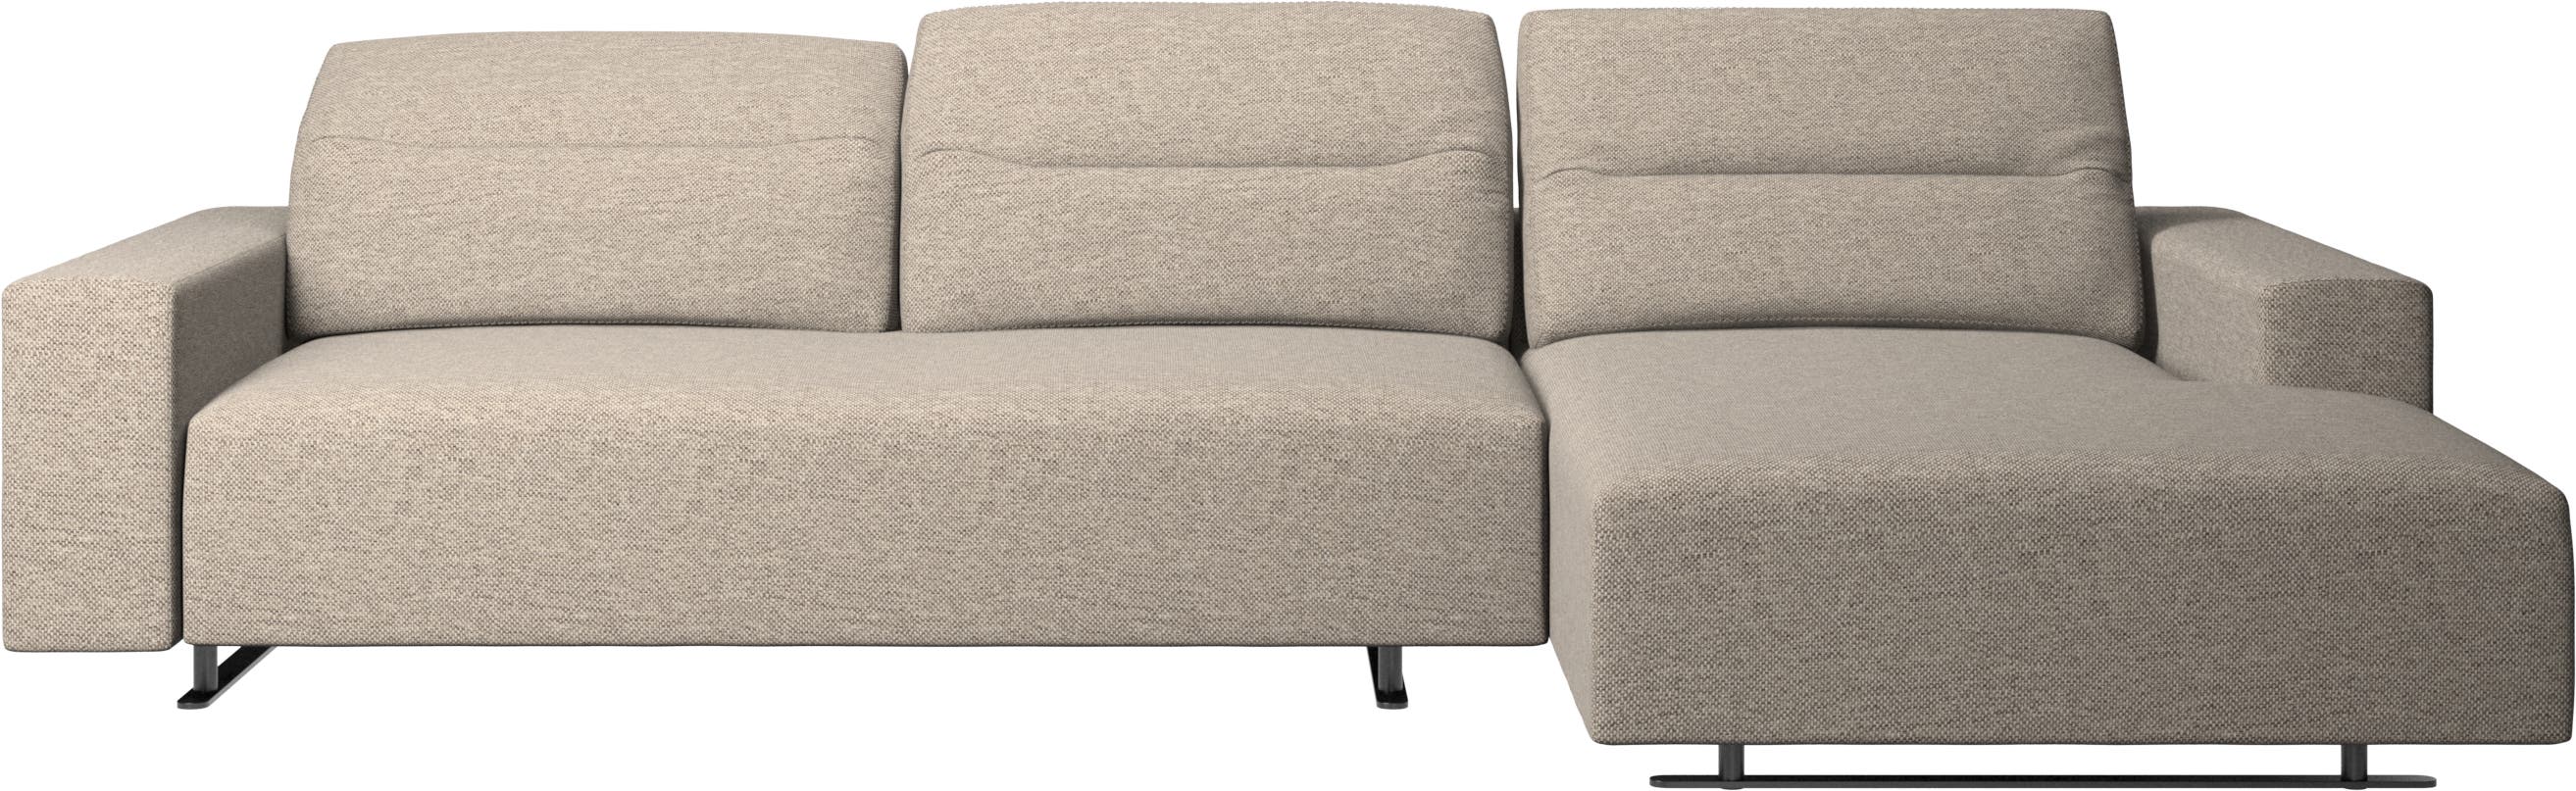 Hampton sofa with adjustable back and resting unit right side